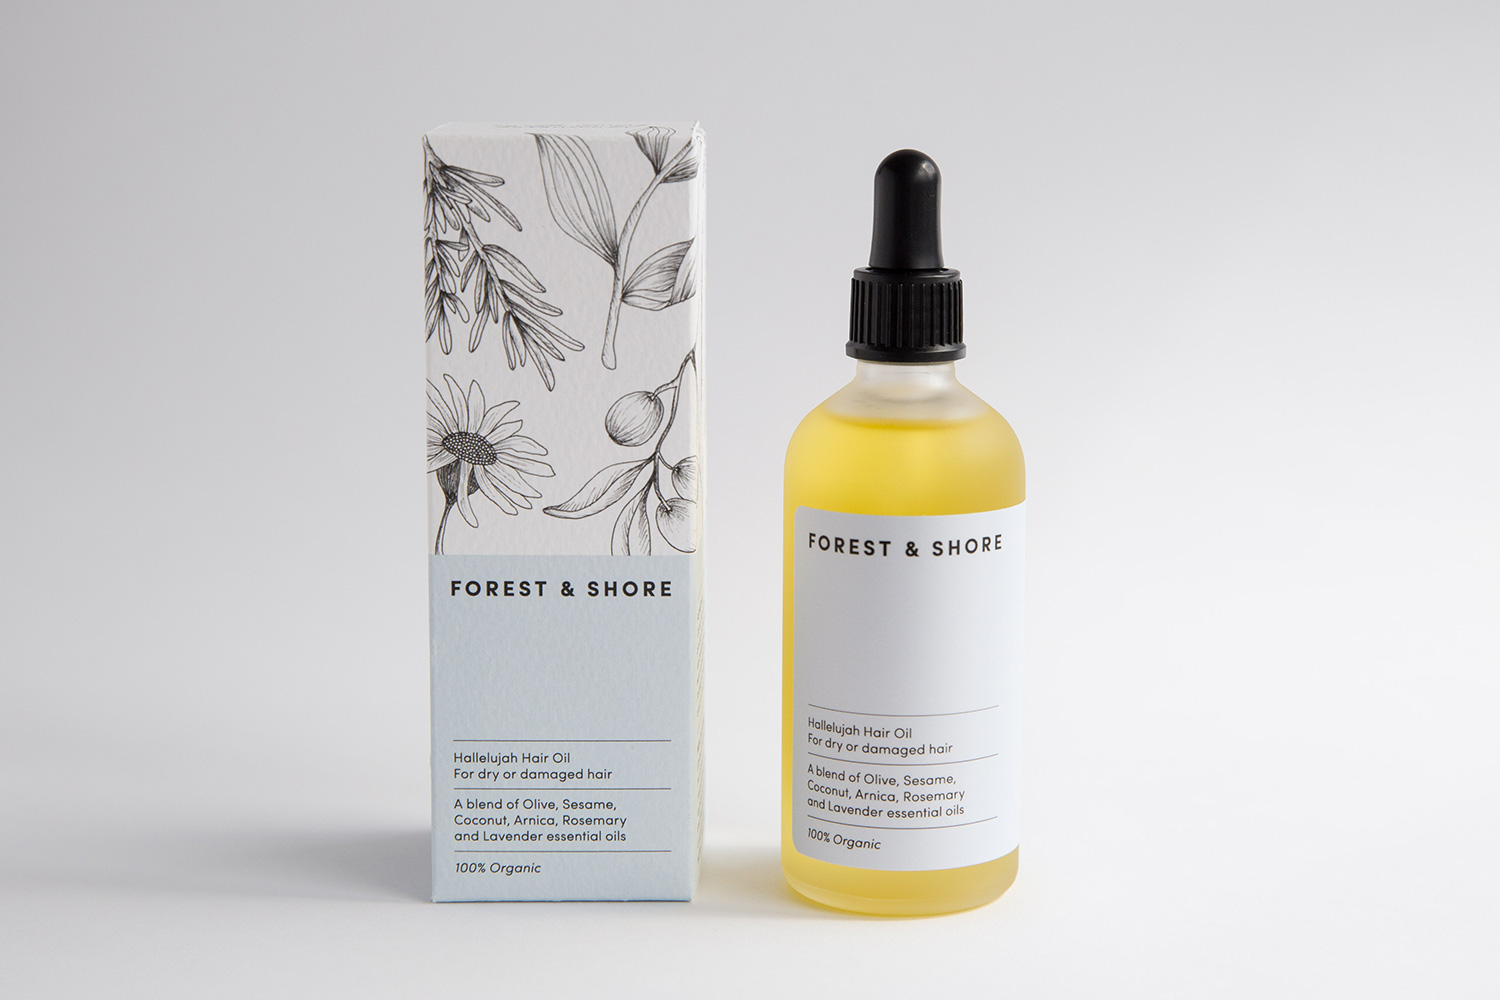 The Beautiful Feminine Packaging of Forest & Shore Skincare